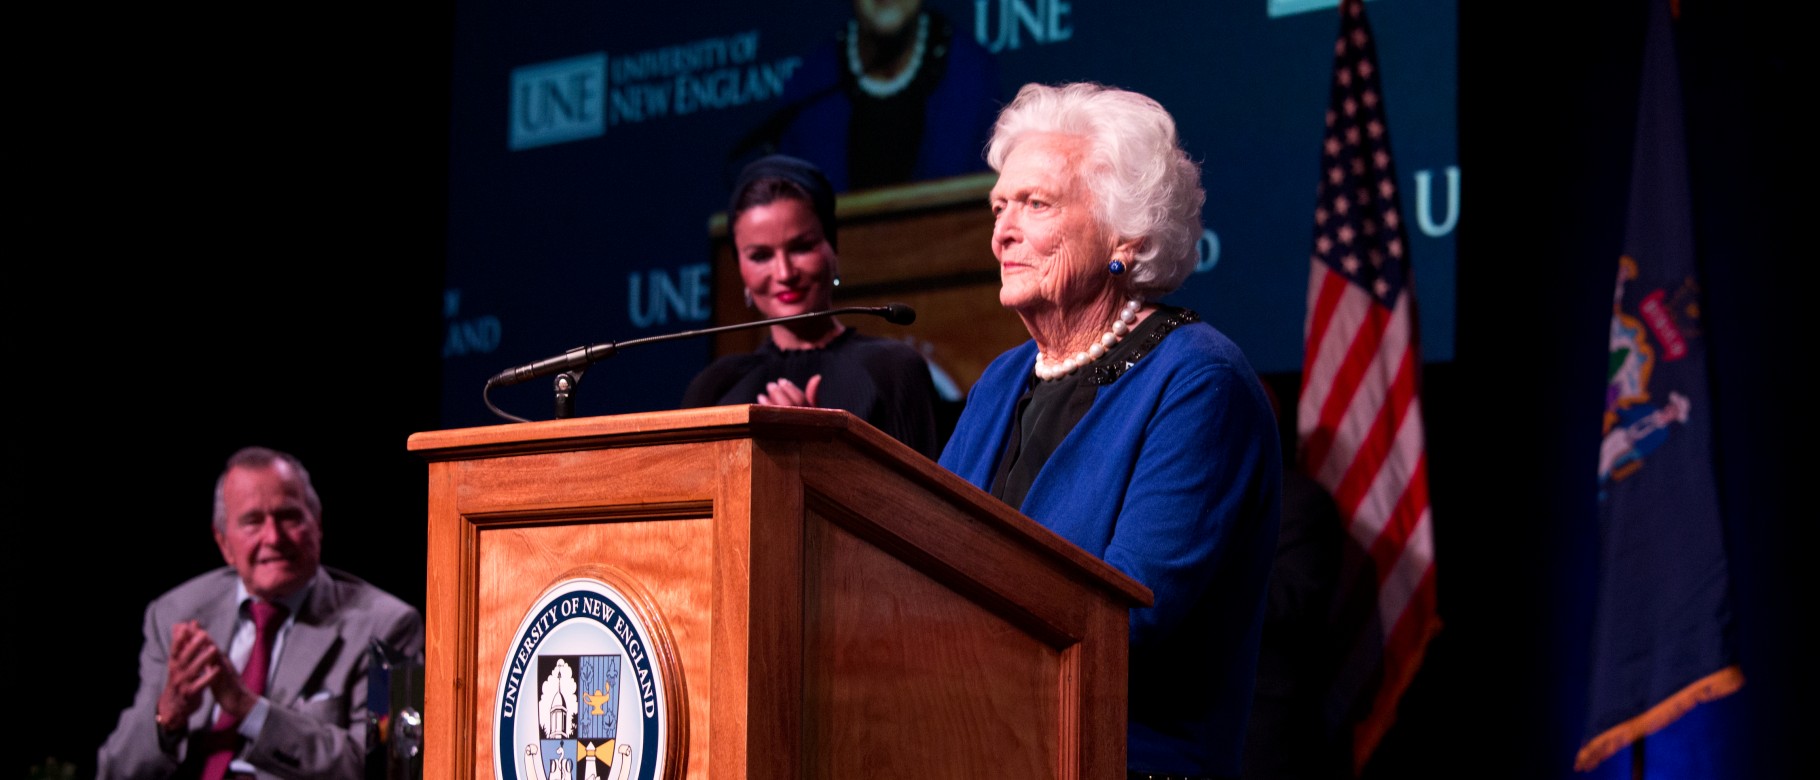 First Lady Barbara Bush at the George and Barbara Bush Distinguished Lecture in 2013